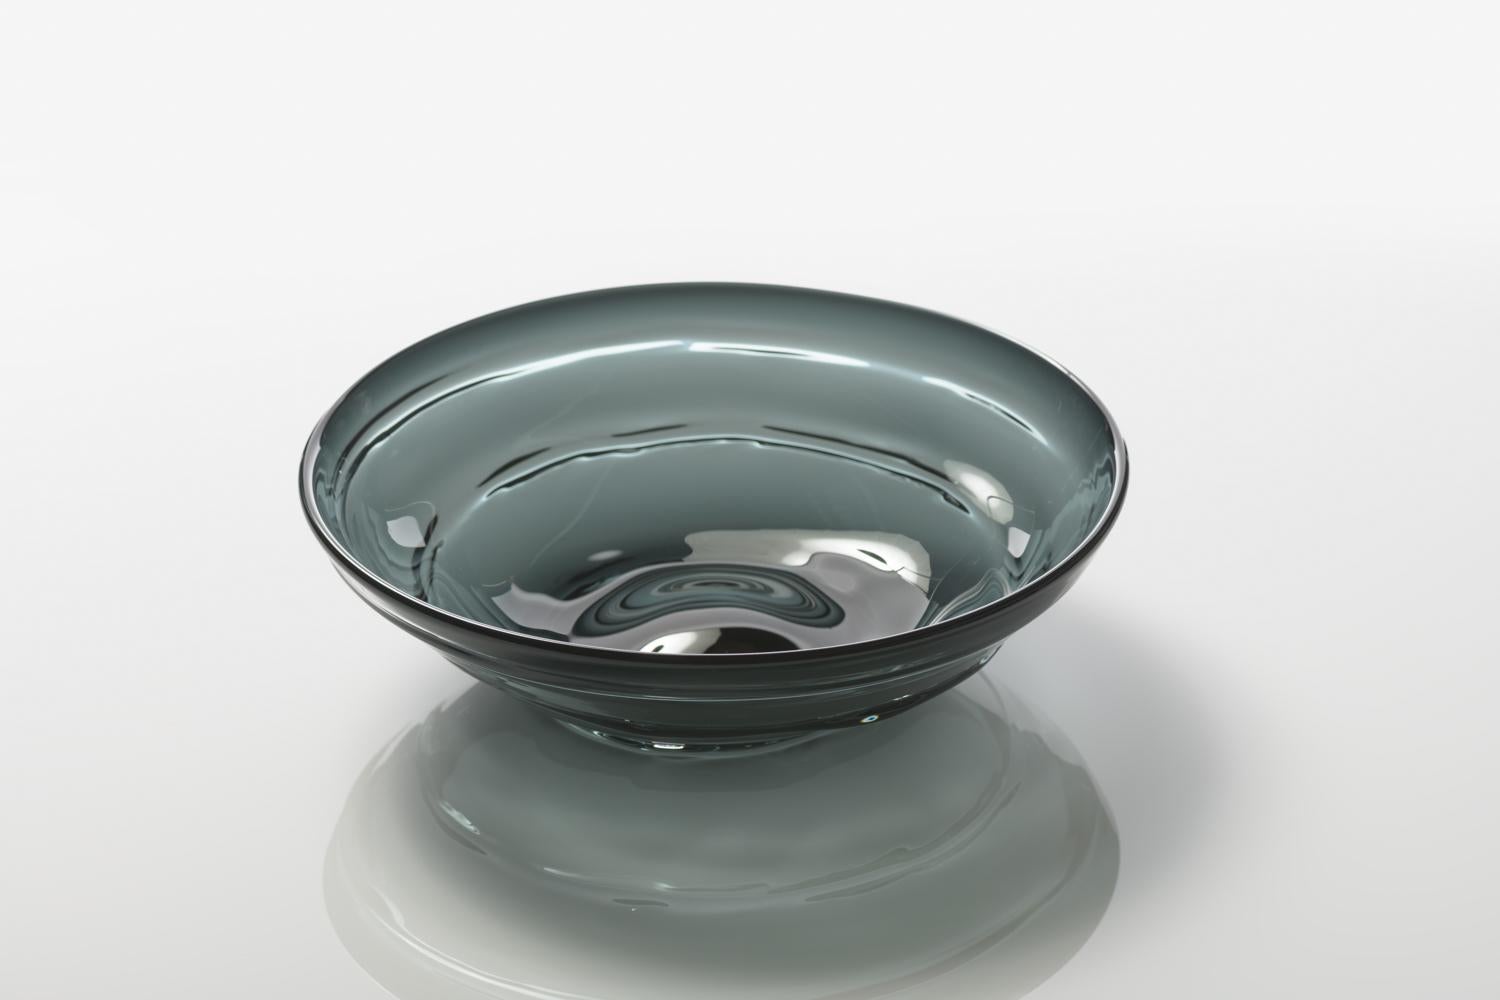 Hand-blown glass design by Kazuki Takizawa. Individually crafted at KT Glassworks in Los Angeles, California. Each bowl is textured one ring at a time and uniquely made. No mold is used in the production of these pieces. All measurements are